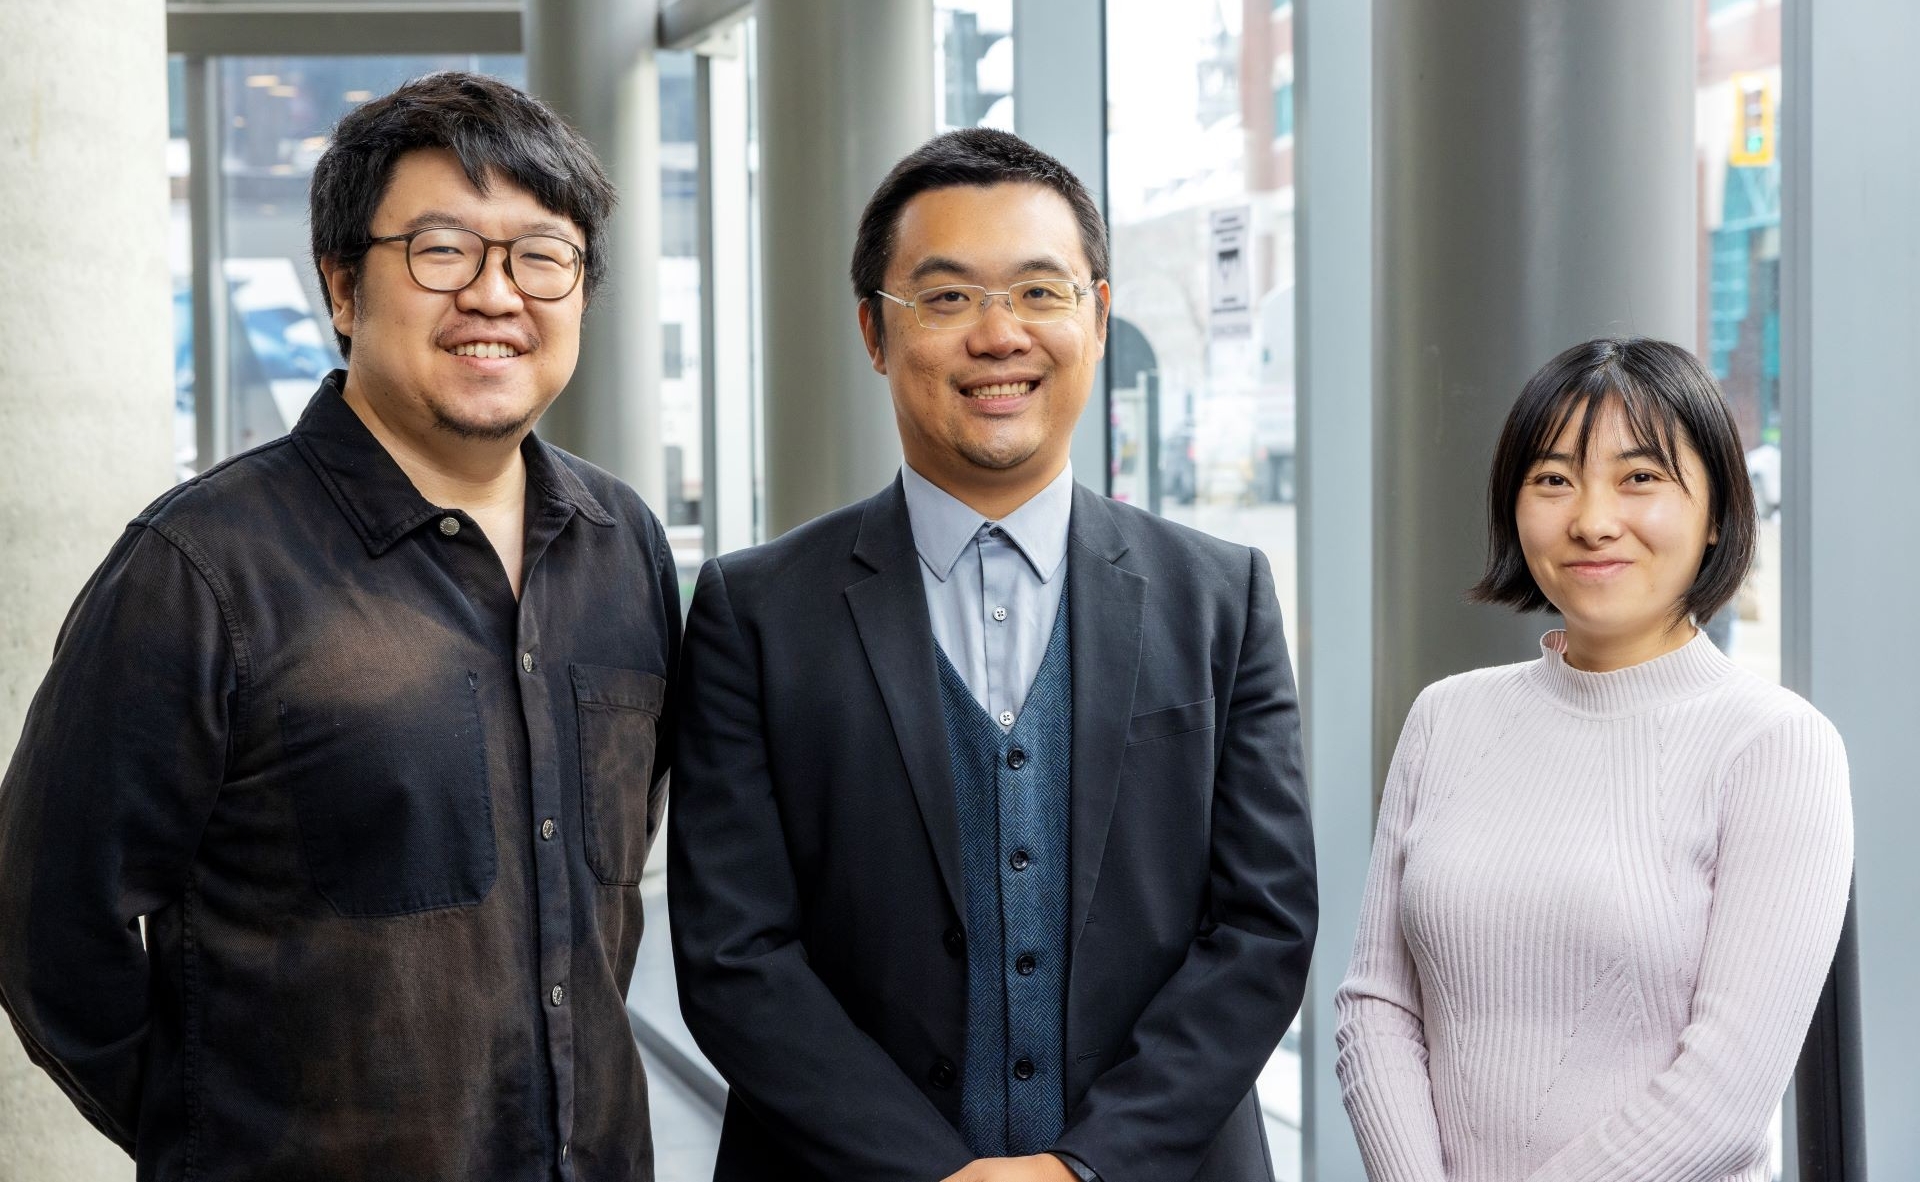 PhD student Hang Du wears a black shirt, Prof. Jun Yan has glasses, a black jacket over a blue shirt and waistcoat and PhD student Juanwei Chen wears a high collar white crew neck sweater.